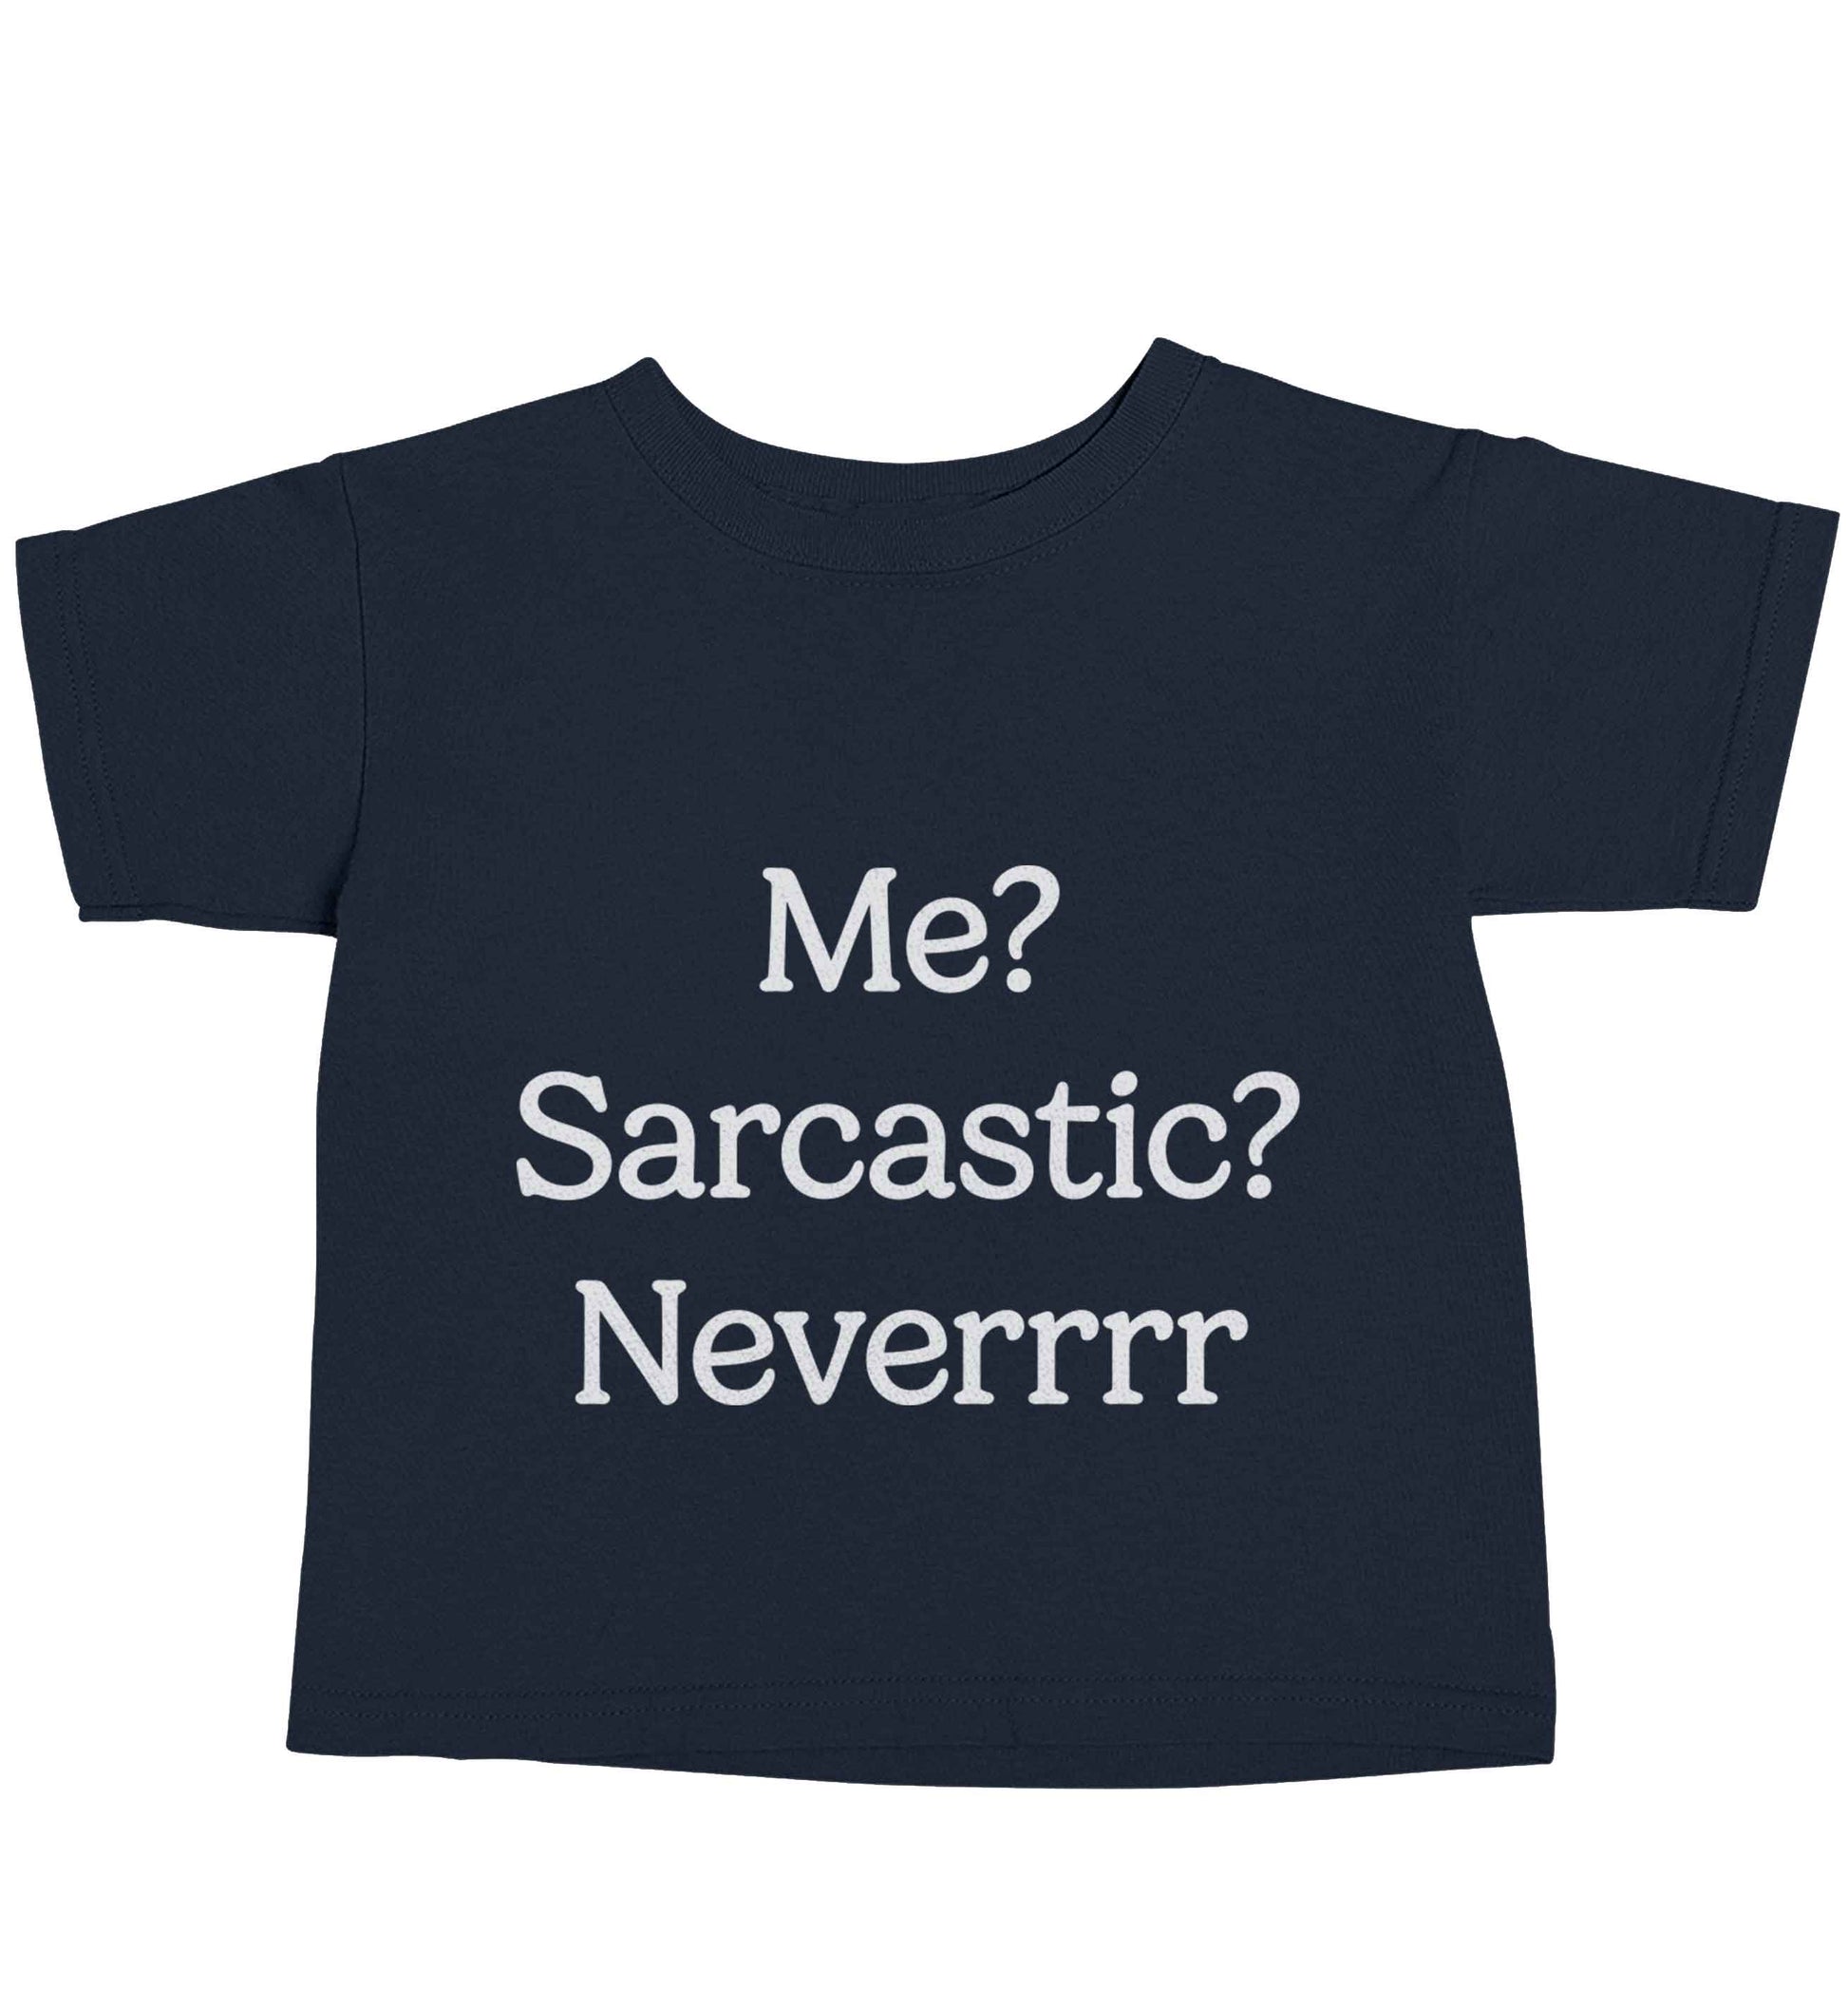 Me? sarcastic? never navy baby toddler Tshirt 2 Years